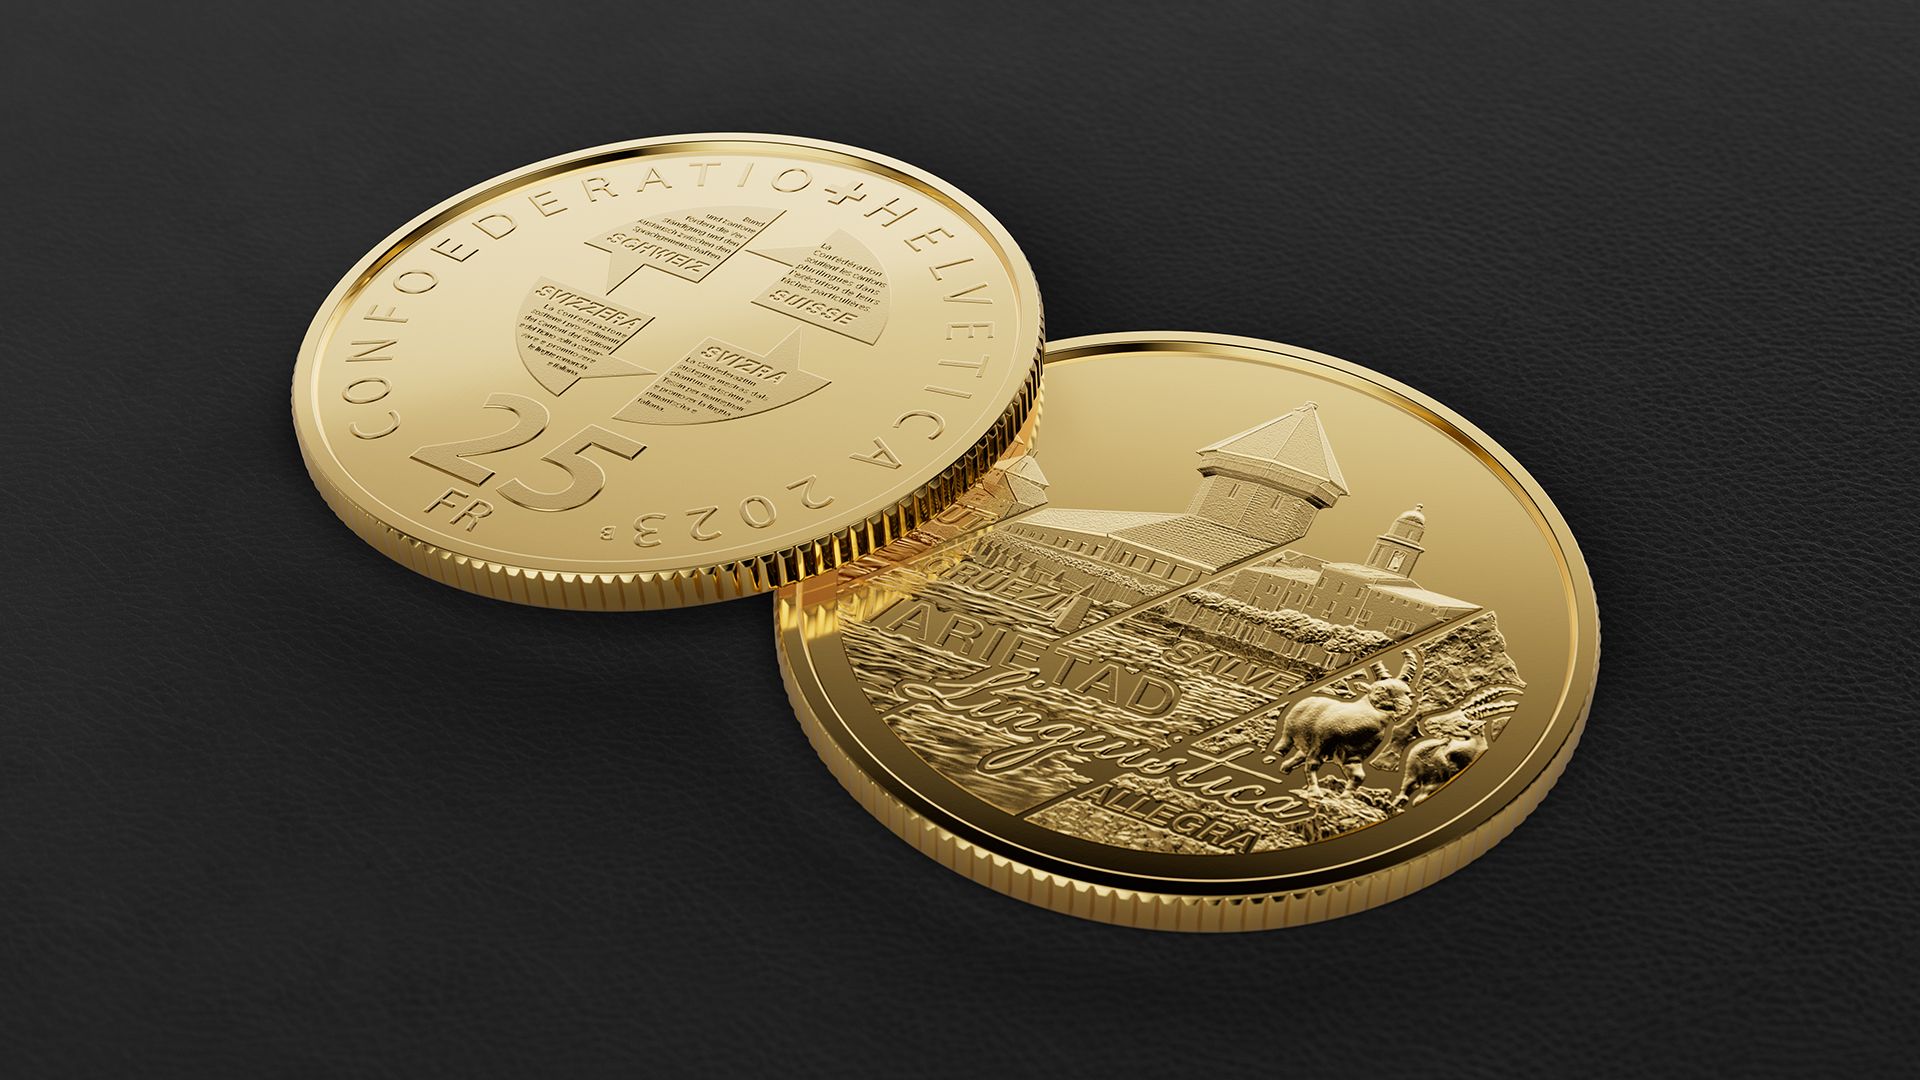 Gold coin “Swiss linguistic diversity”